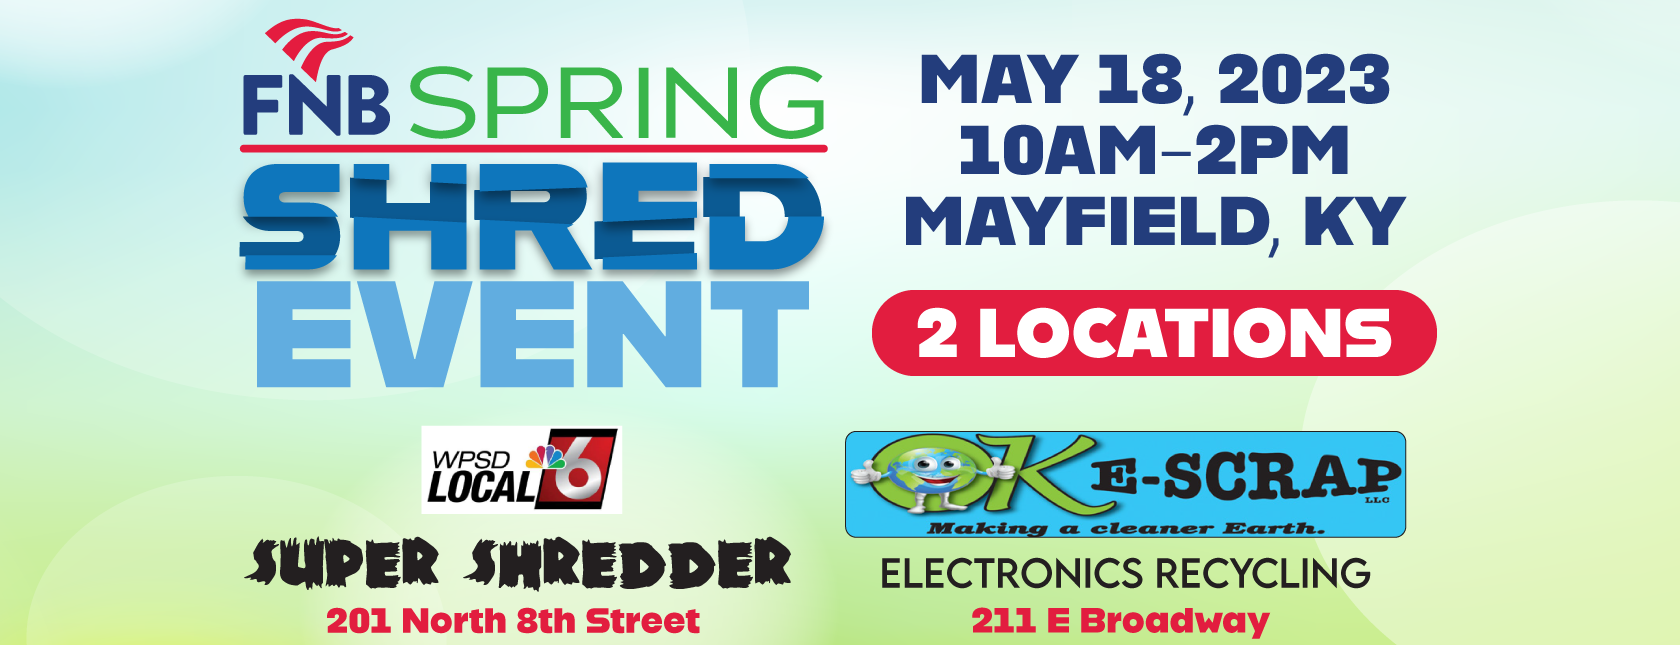 FNB's Spring Shred Event on Thursday, May 18th